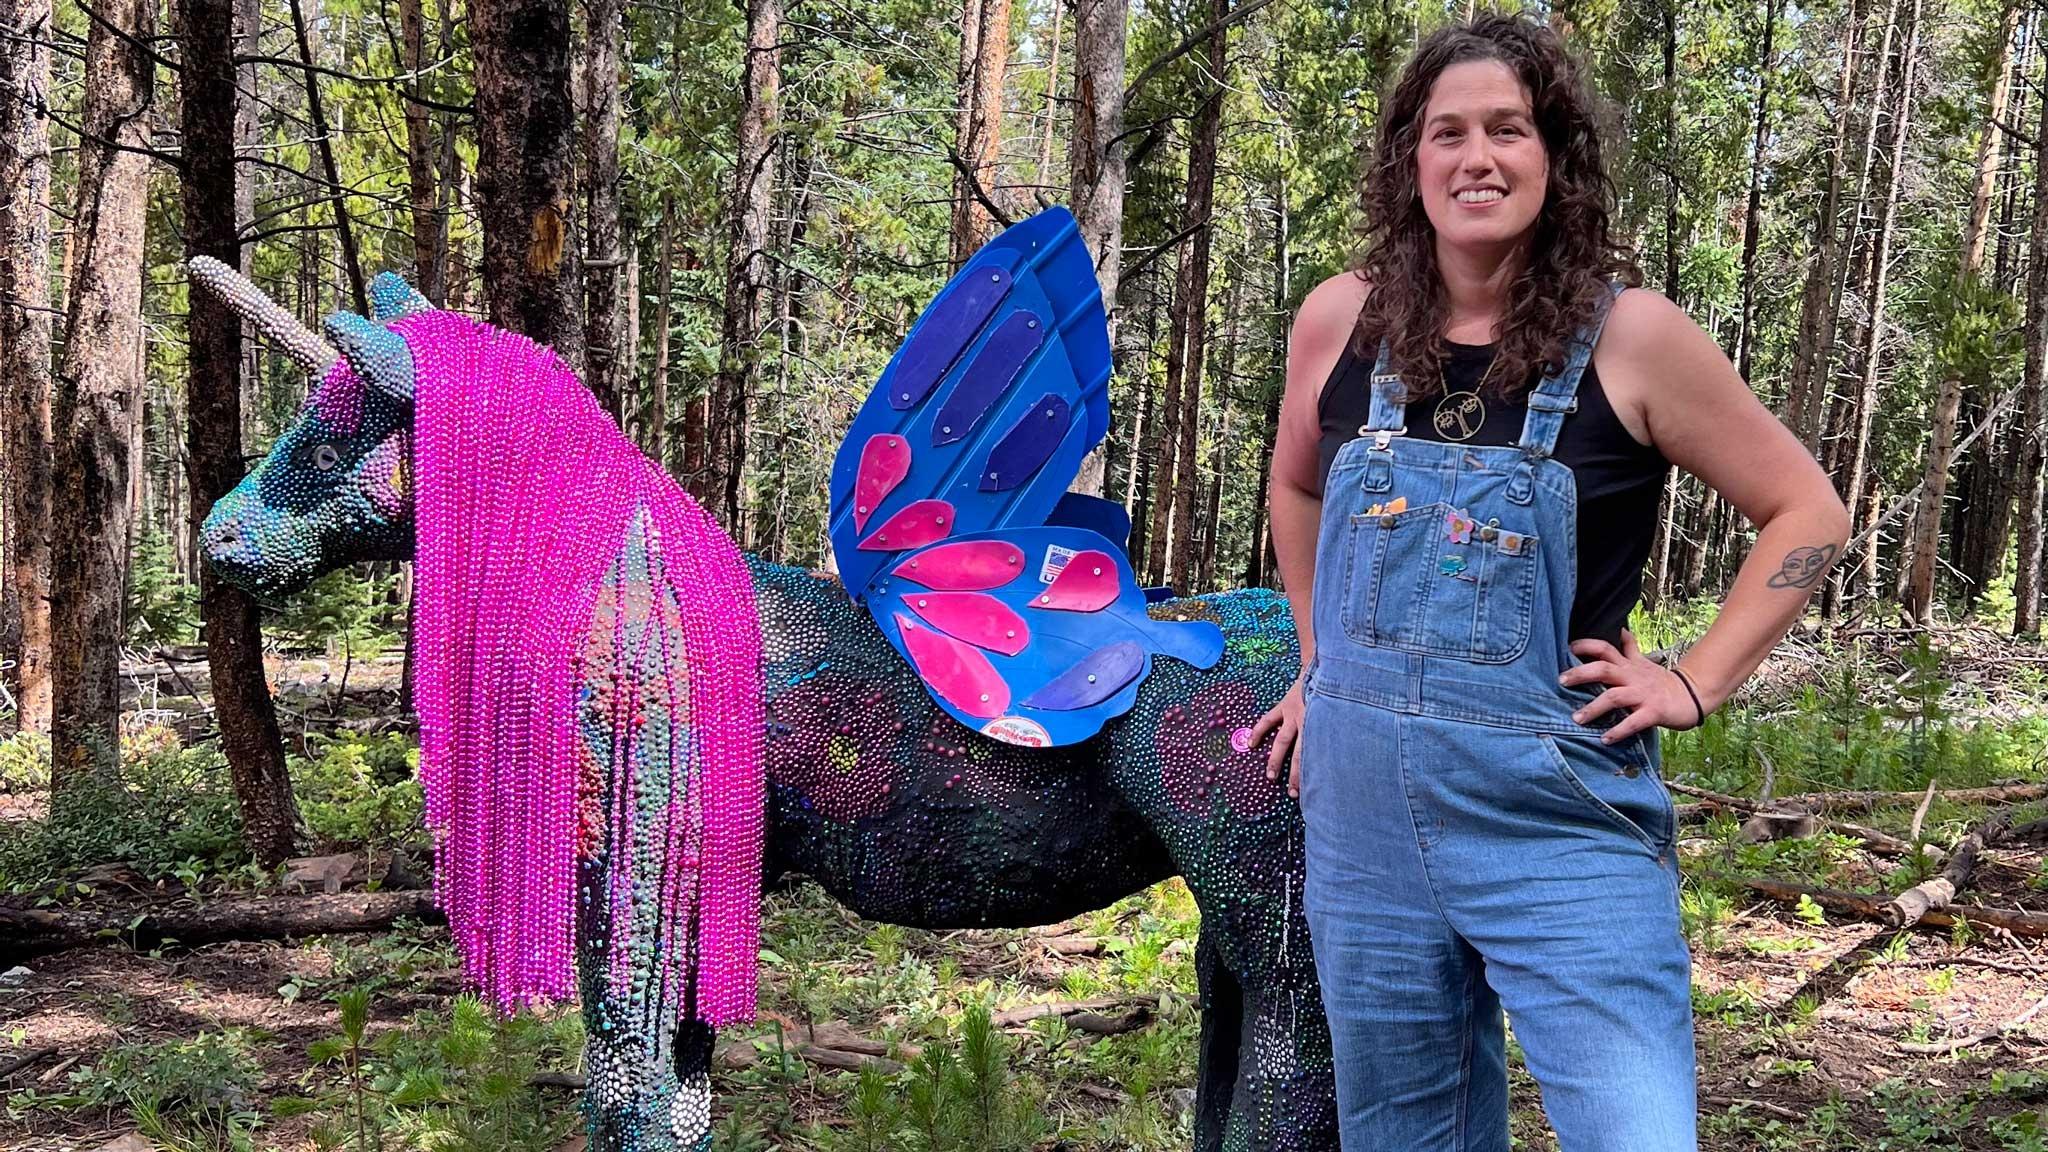 Artist Calder Kamin stands in a forest with her unicorn made completely out of trash, featured in the PLAY episode of Craft in America